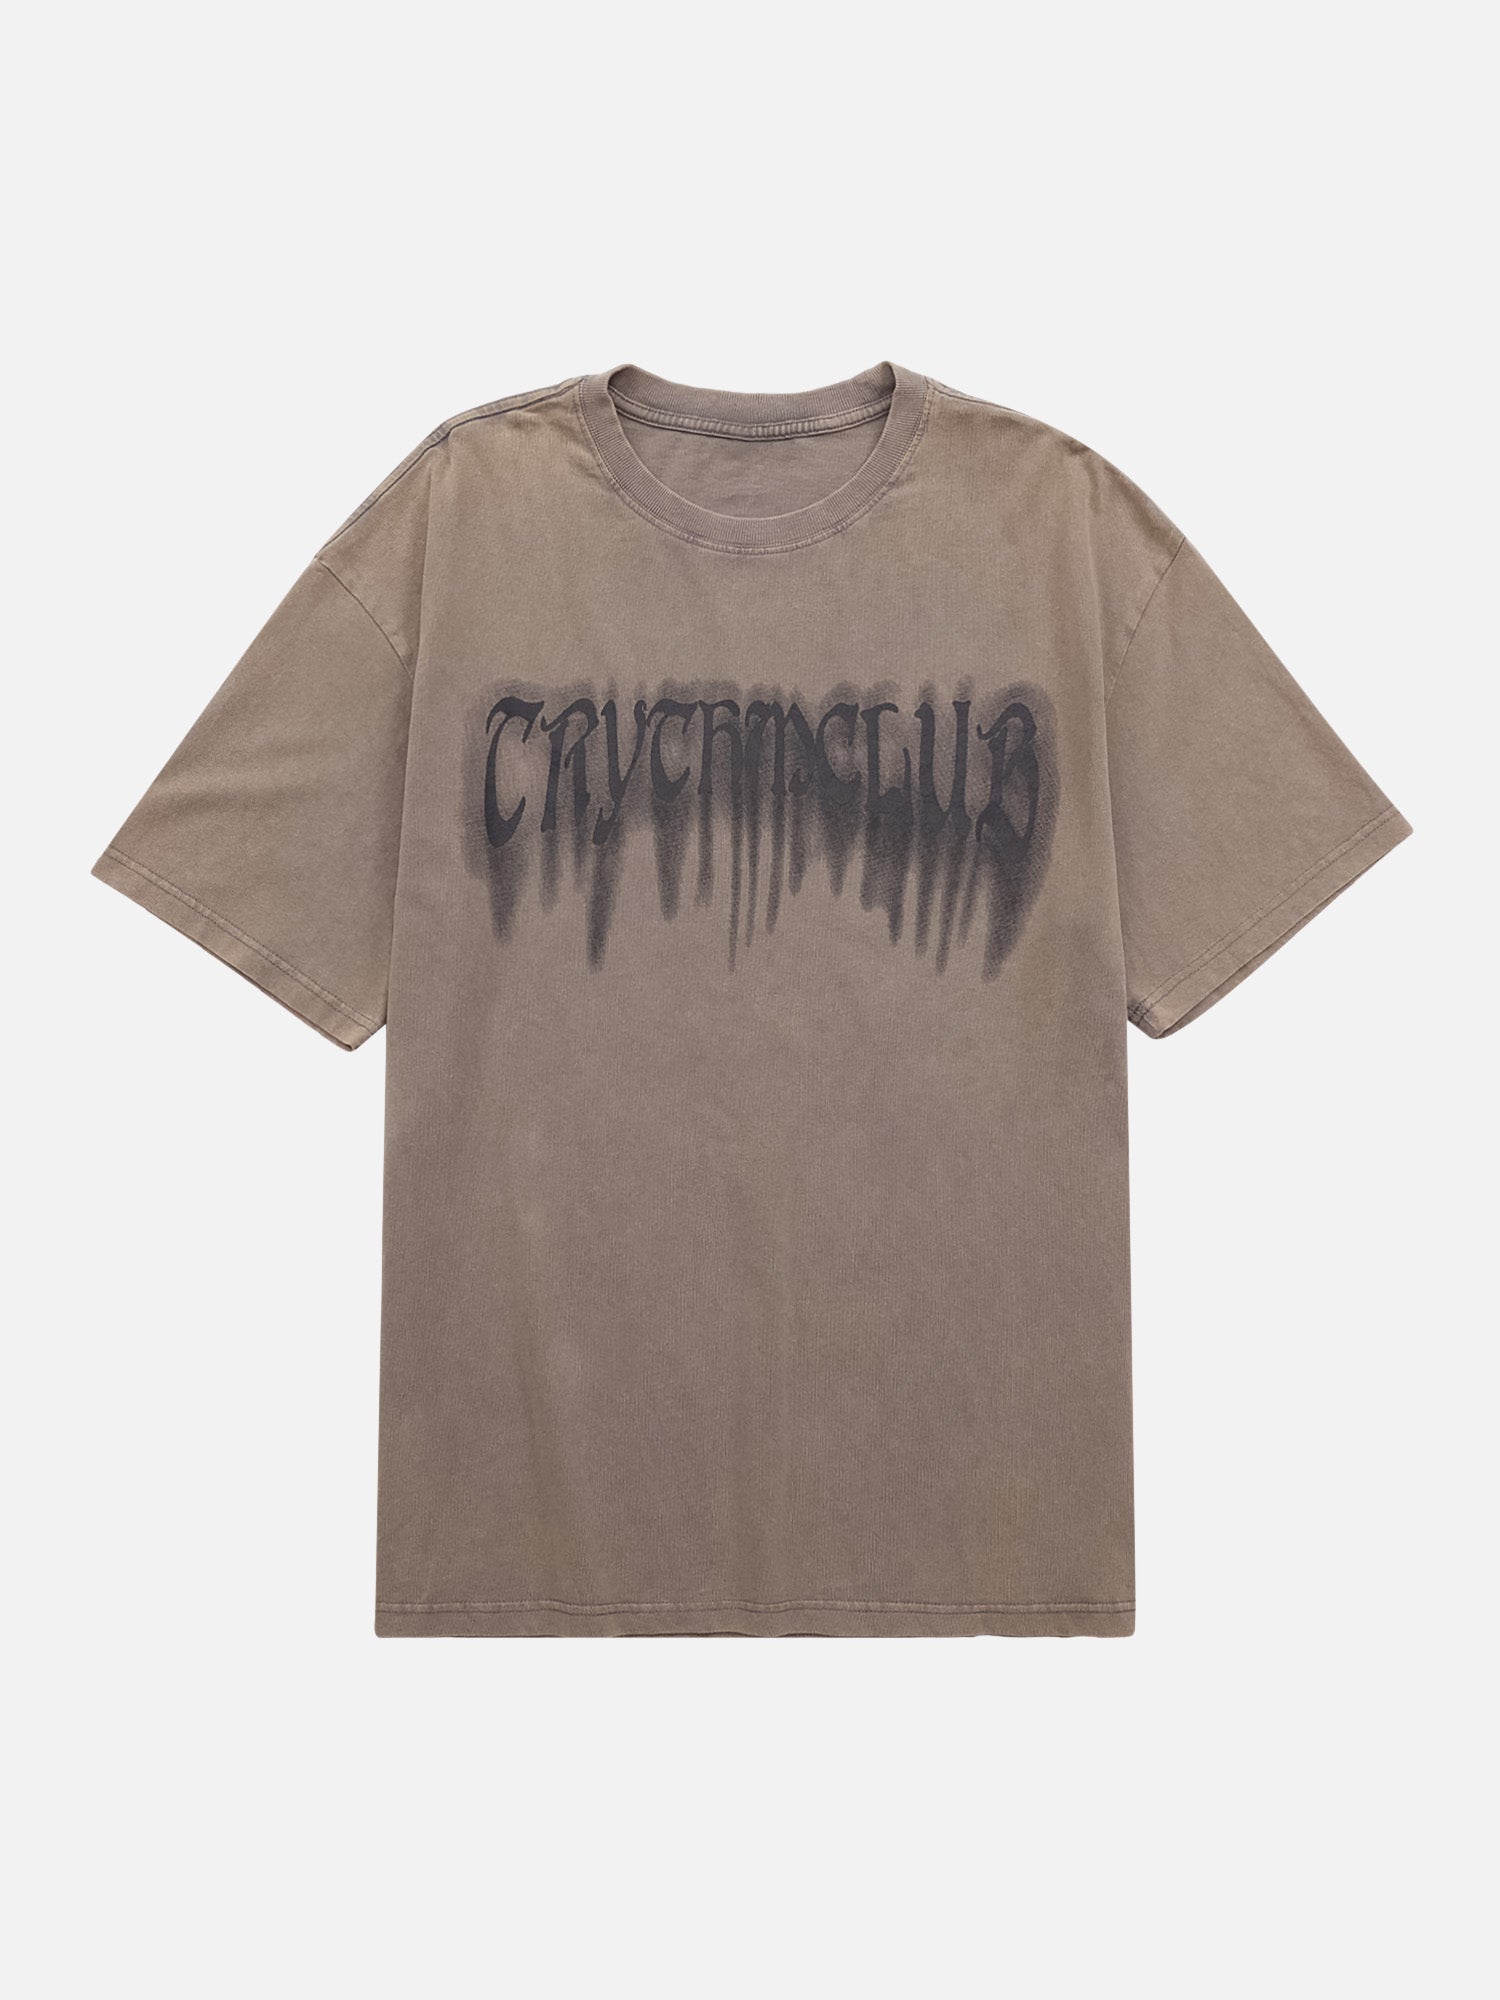 Thesupermade Street Distressed Washed Letter Print T-shirt